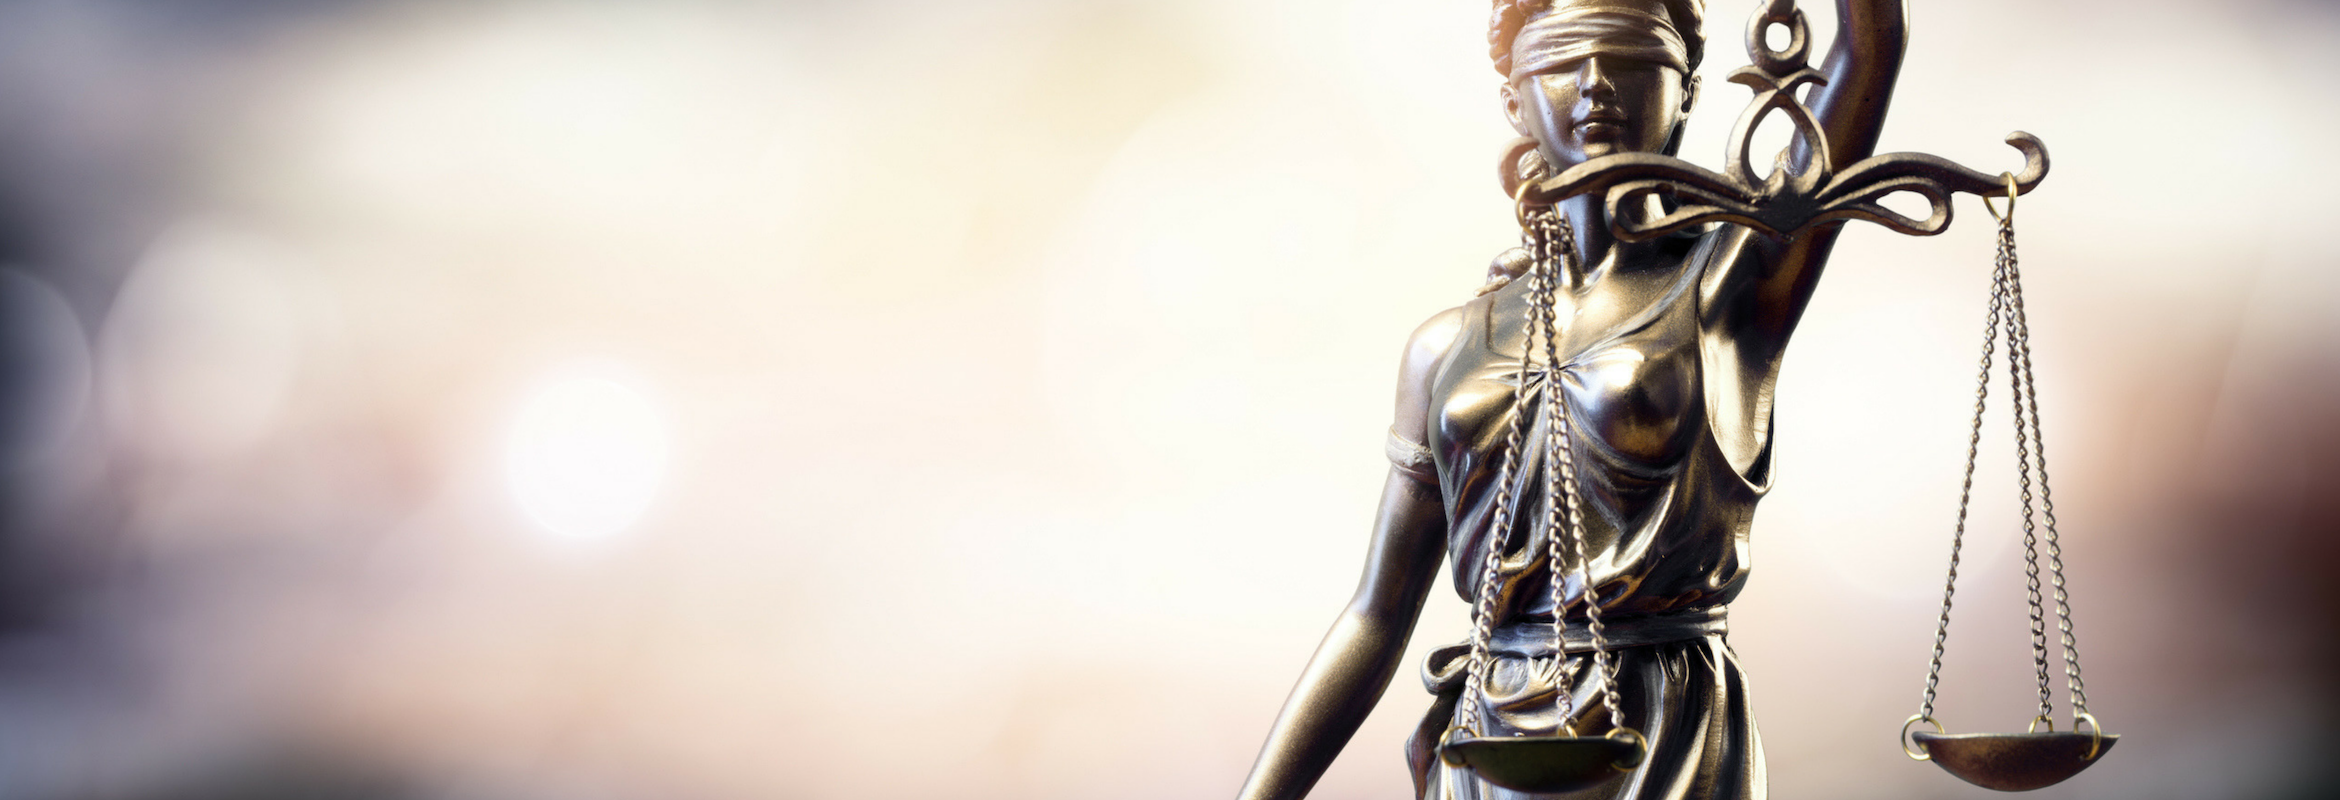 An image of lady justice